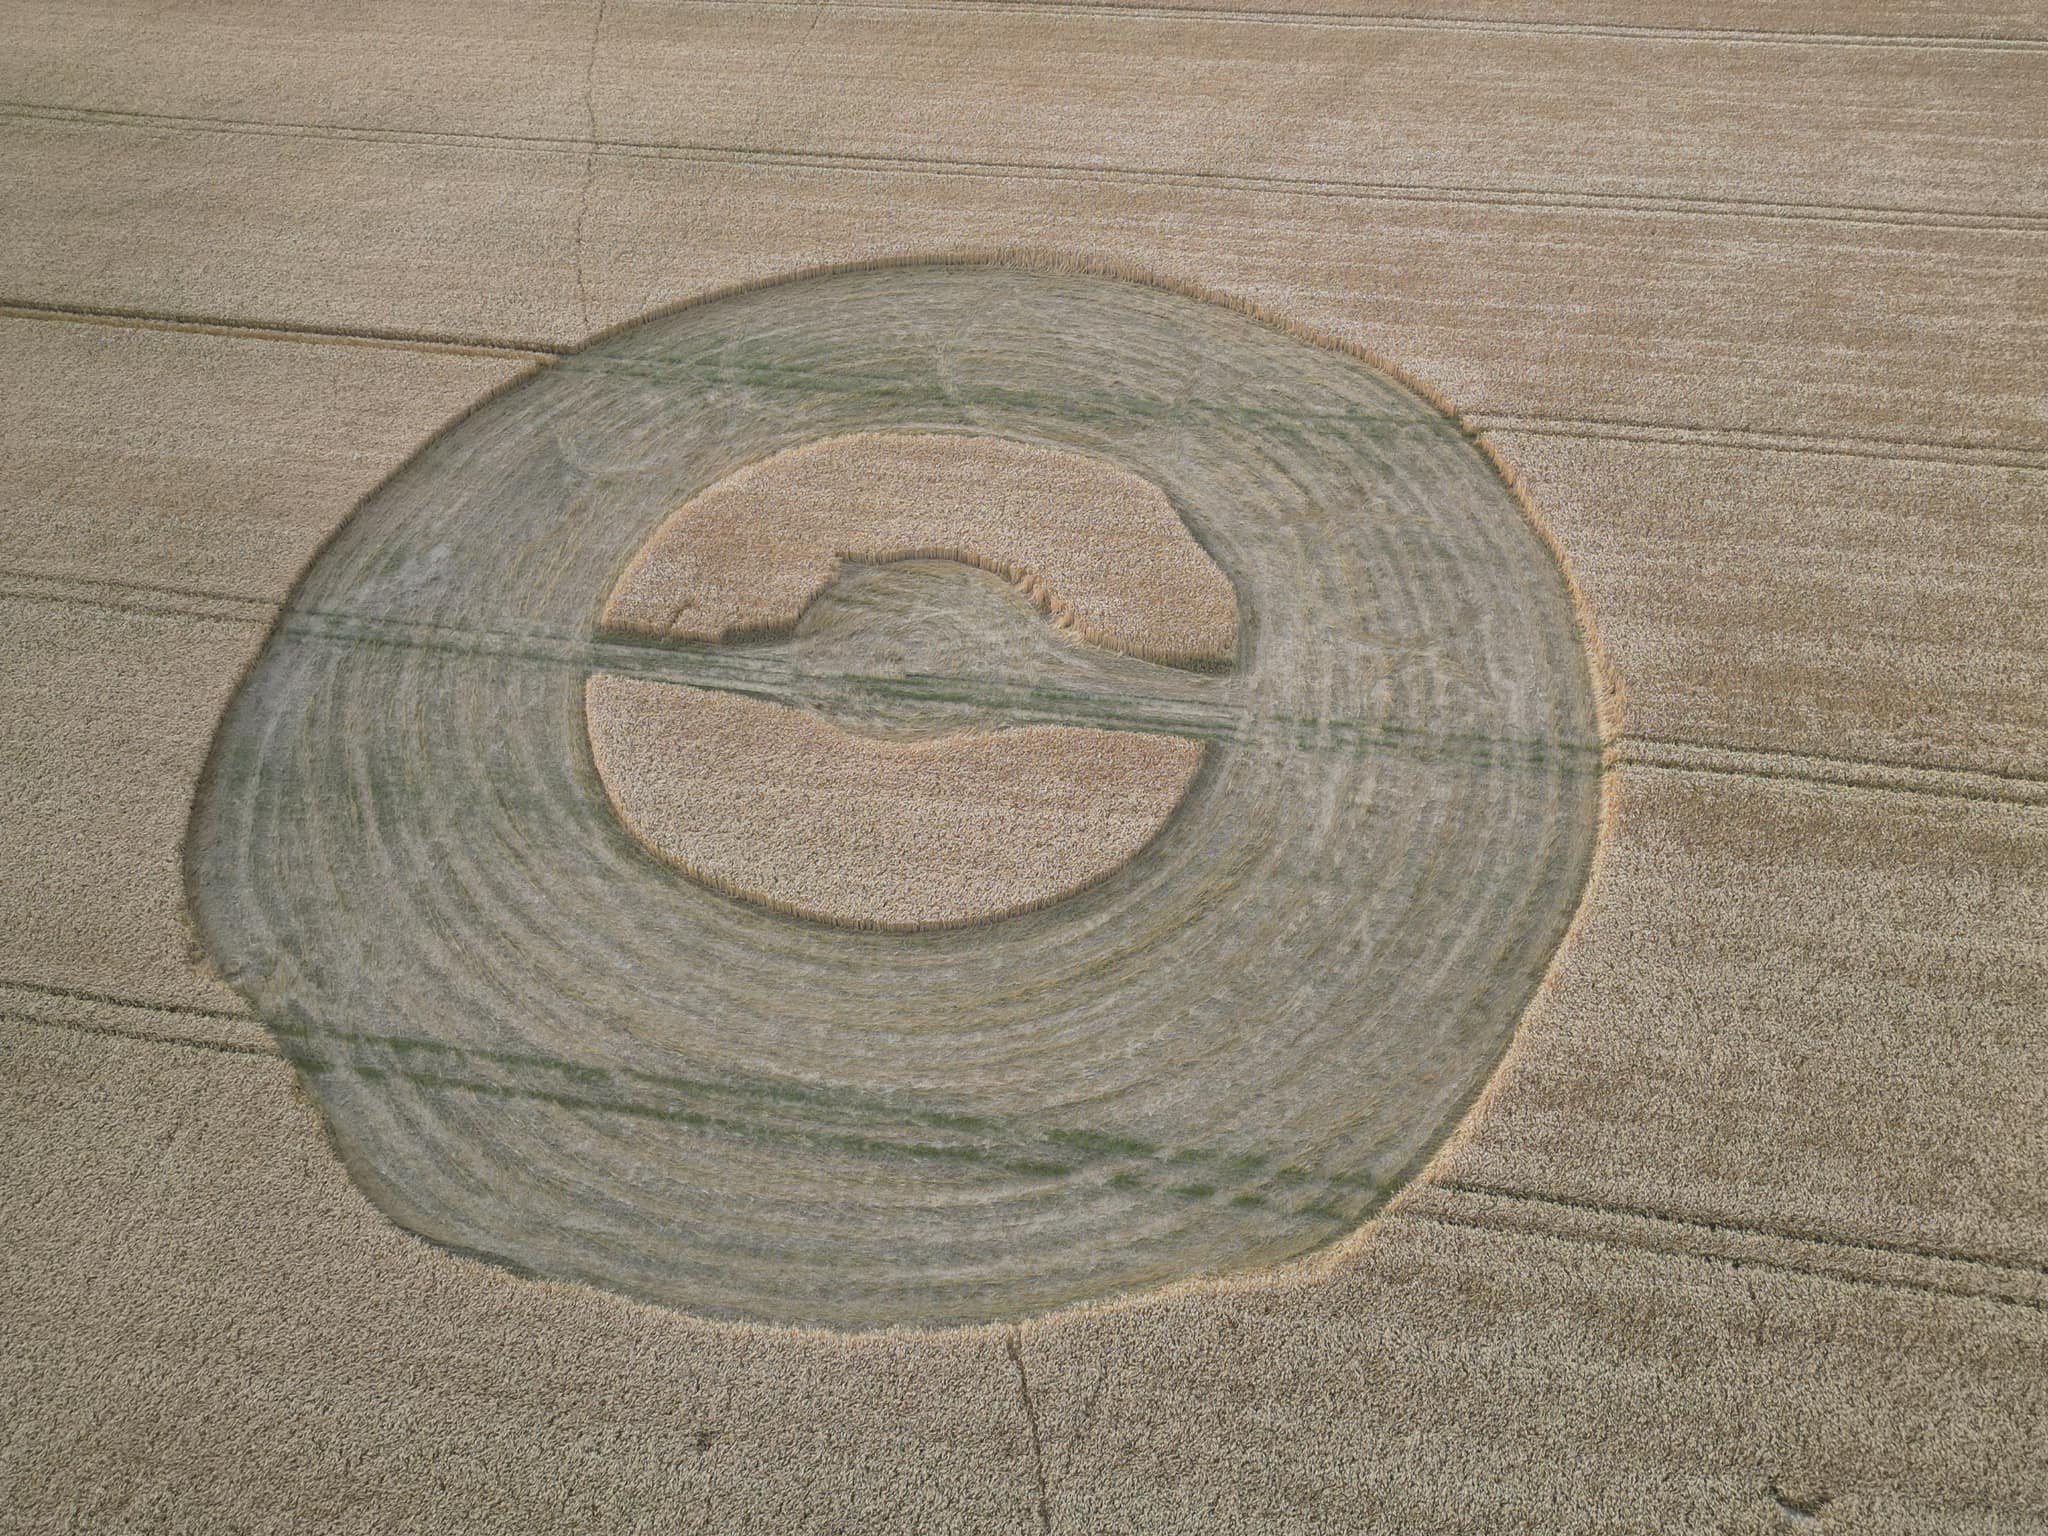 A color photograph almost exactly like the previous photograph taken from an aerial view of a crop circle in the shape of a lumpy wide ring of flattened crop where several rings are visible within the flattened part with a center lumpy circle of upright crop. The circle of upright grass is divided by an off-center horizontal line of flattened crop with a small circle of flattened crop at the center. 3 evenly spaced sets of 2 lines are visible through the crop circle and in the field surrounding the crop circle.